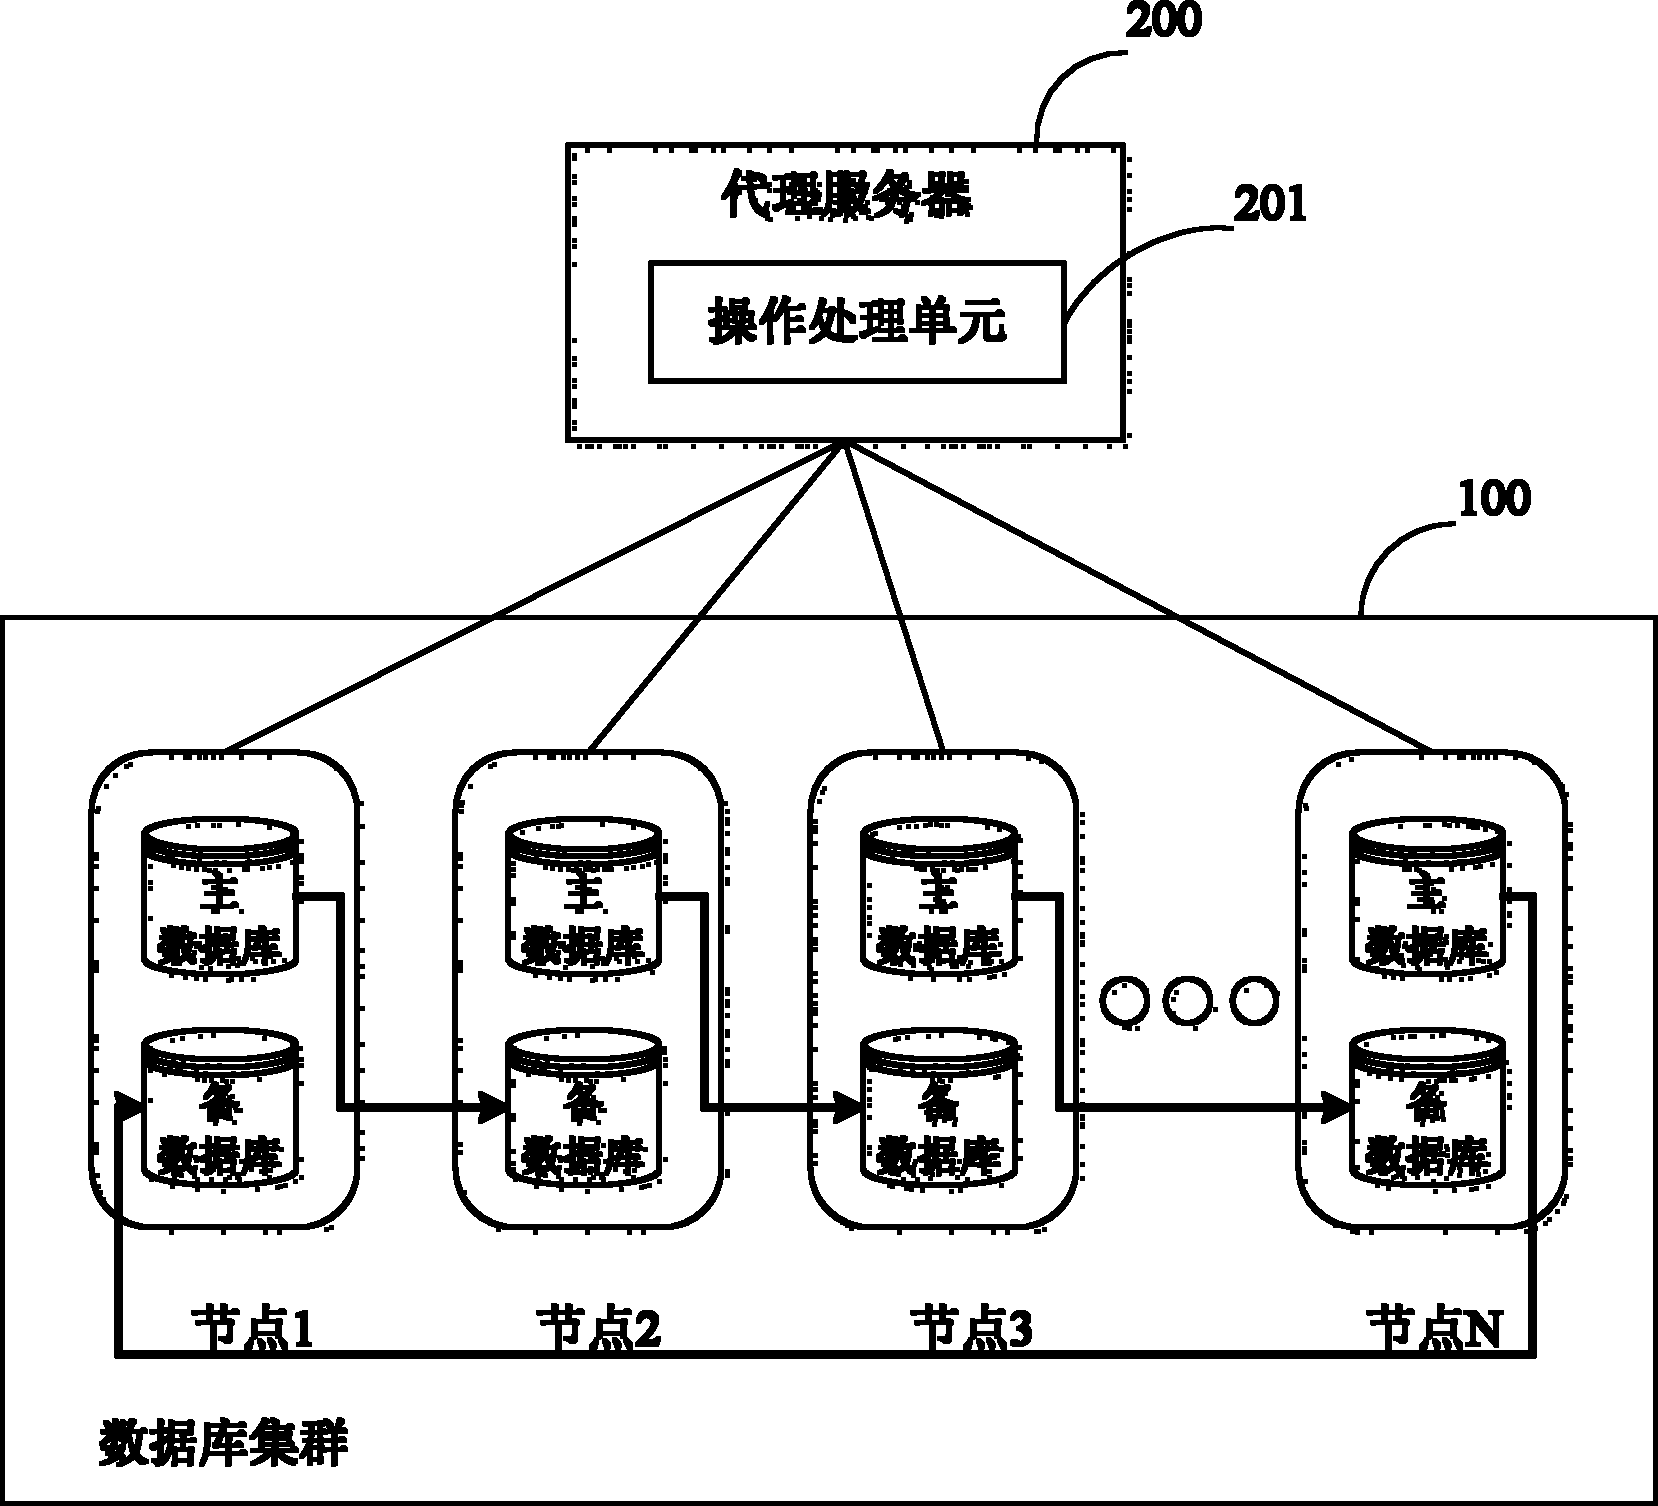 System and method for realizing distributed database